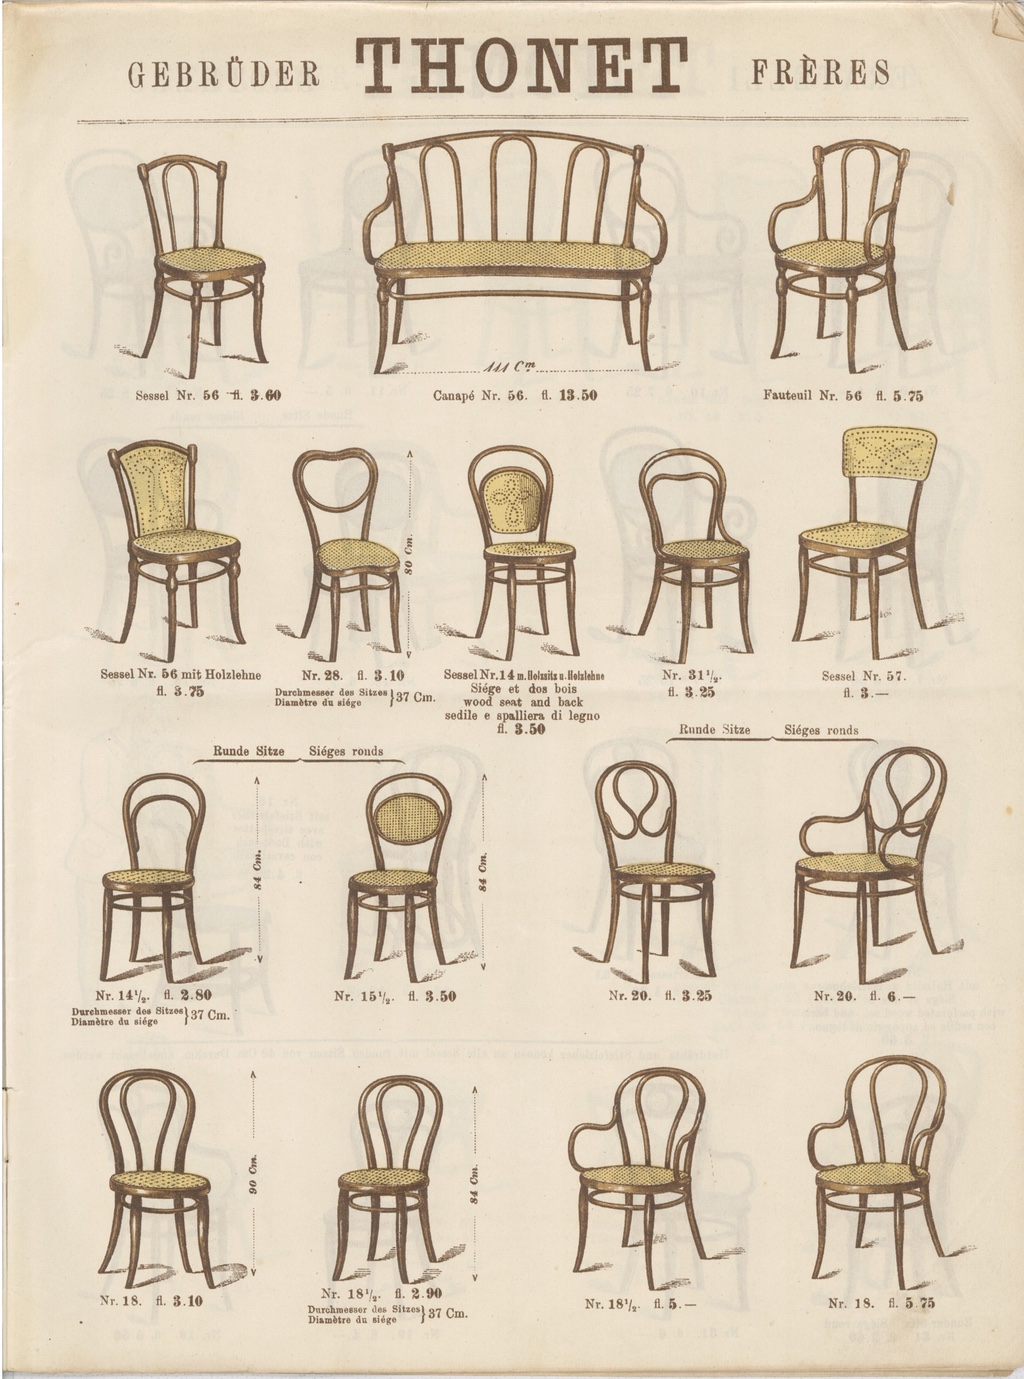 A page of a catalog with Thonet chair samples. Four rows of fill the page with various different designs. The text at the top of the pages reads, "THONET."